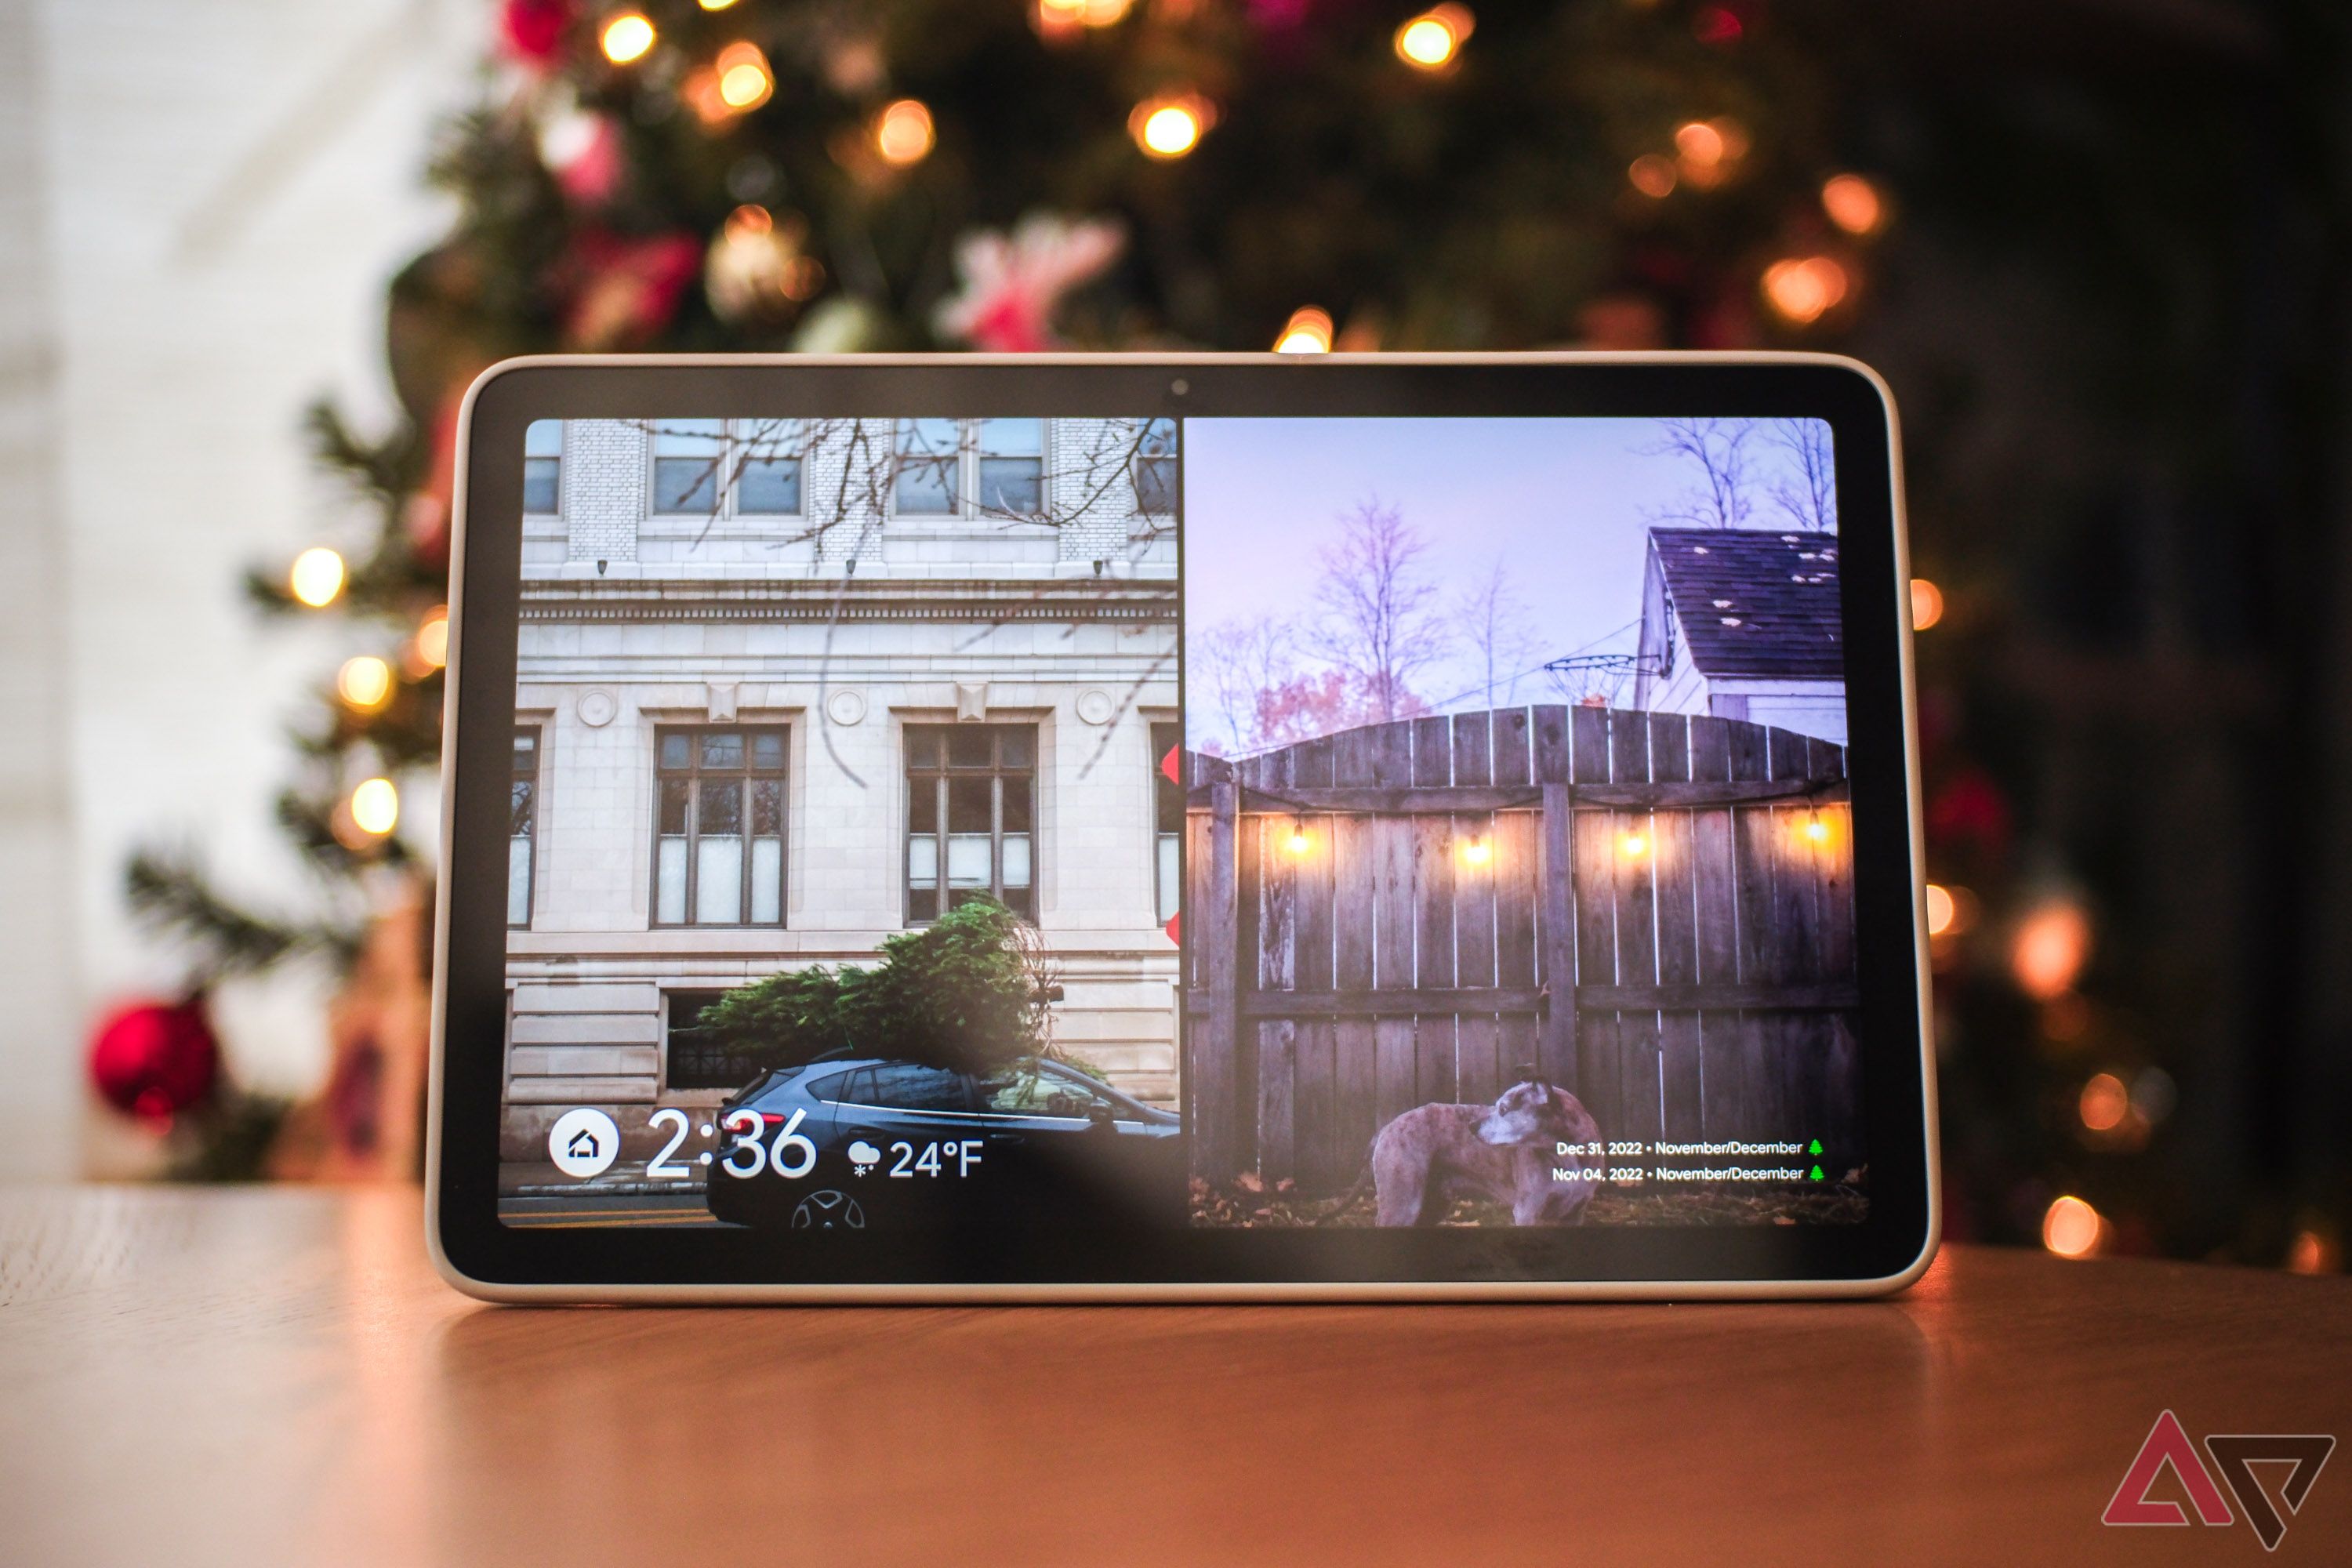 A Google Pixel Tablet in Hub Mode in front of an illuminated Christmas tree